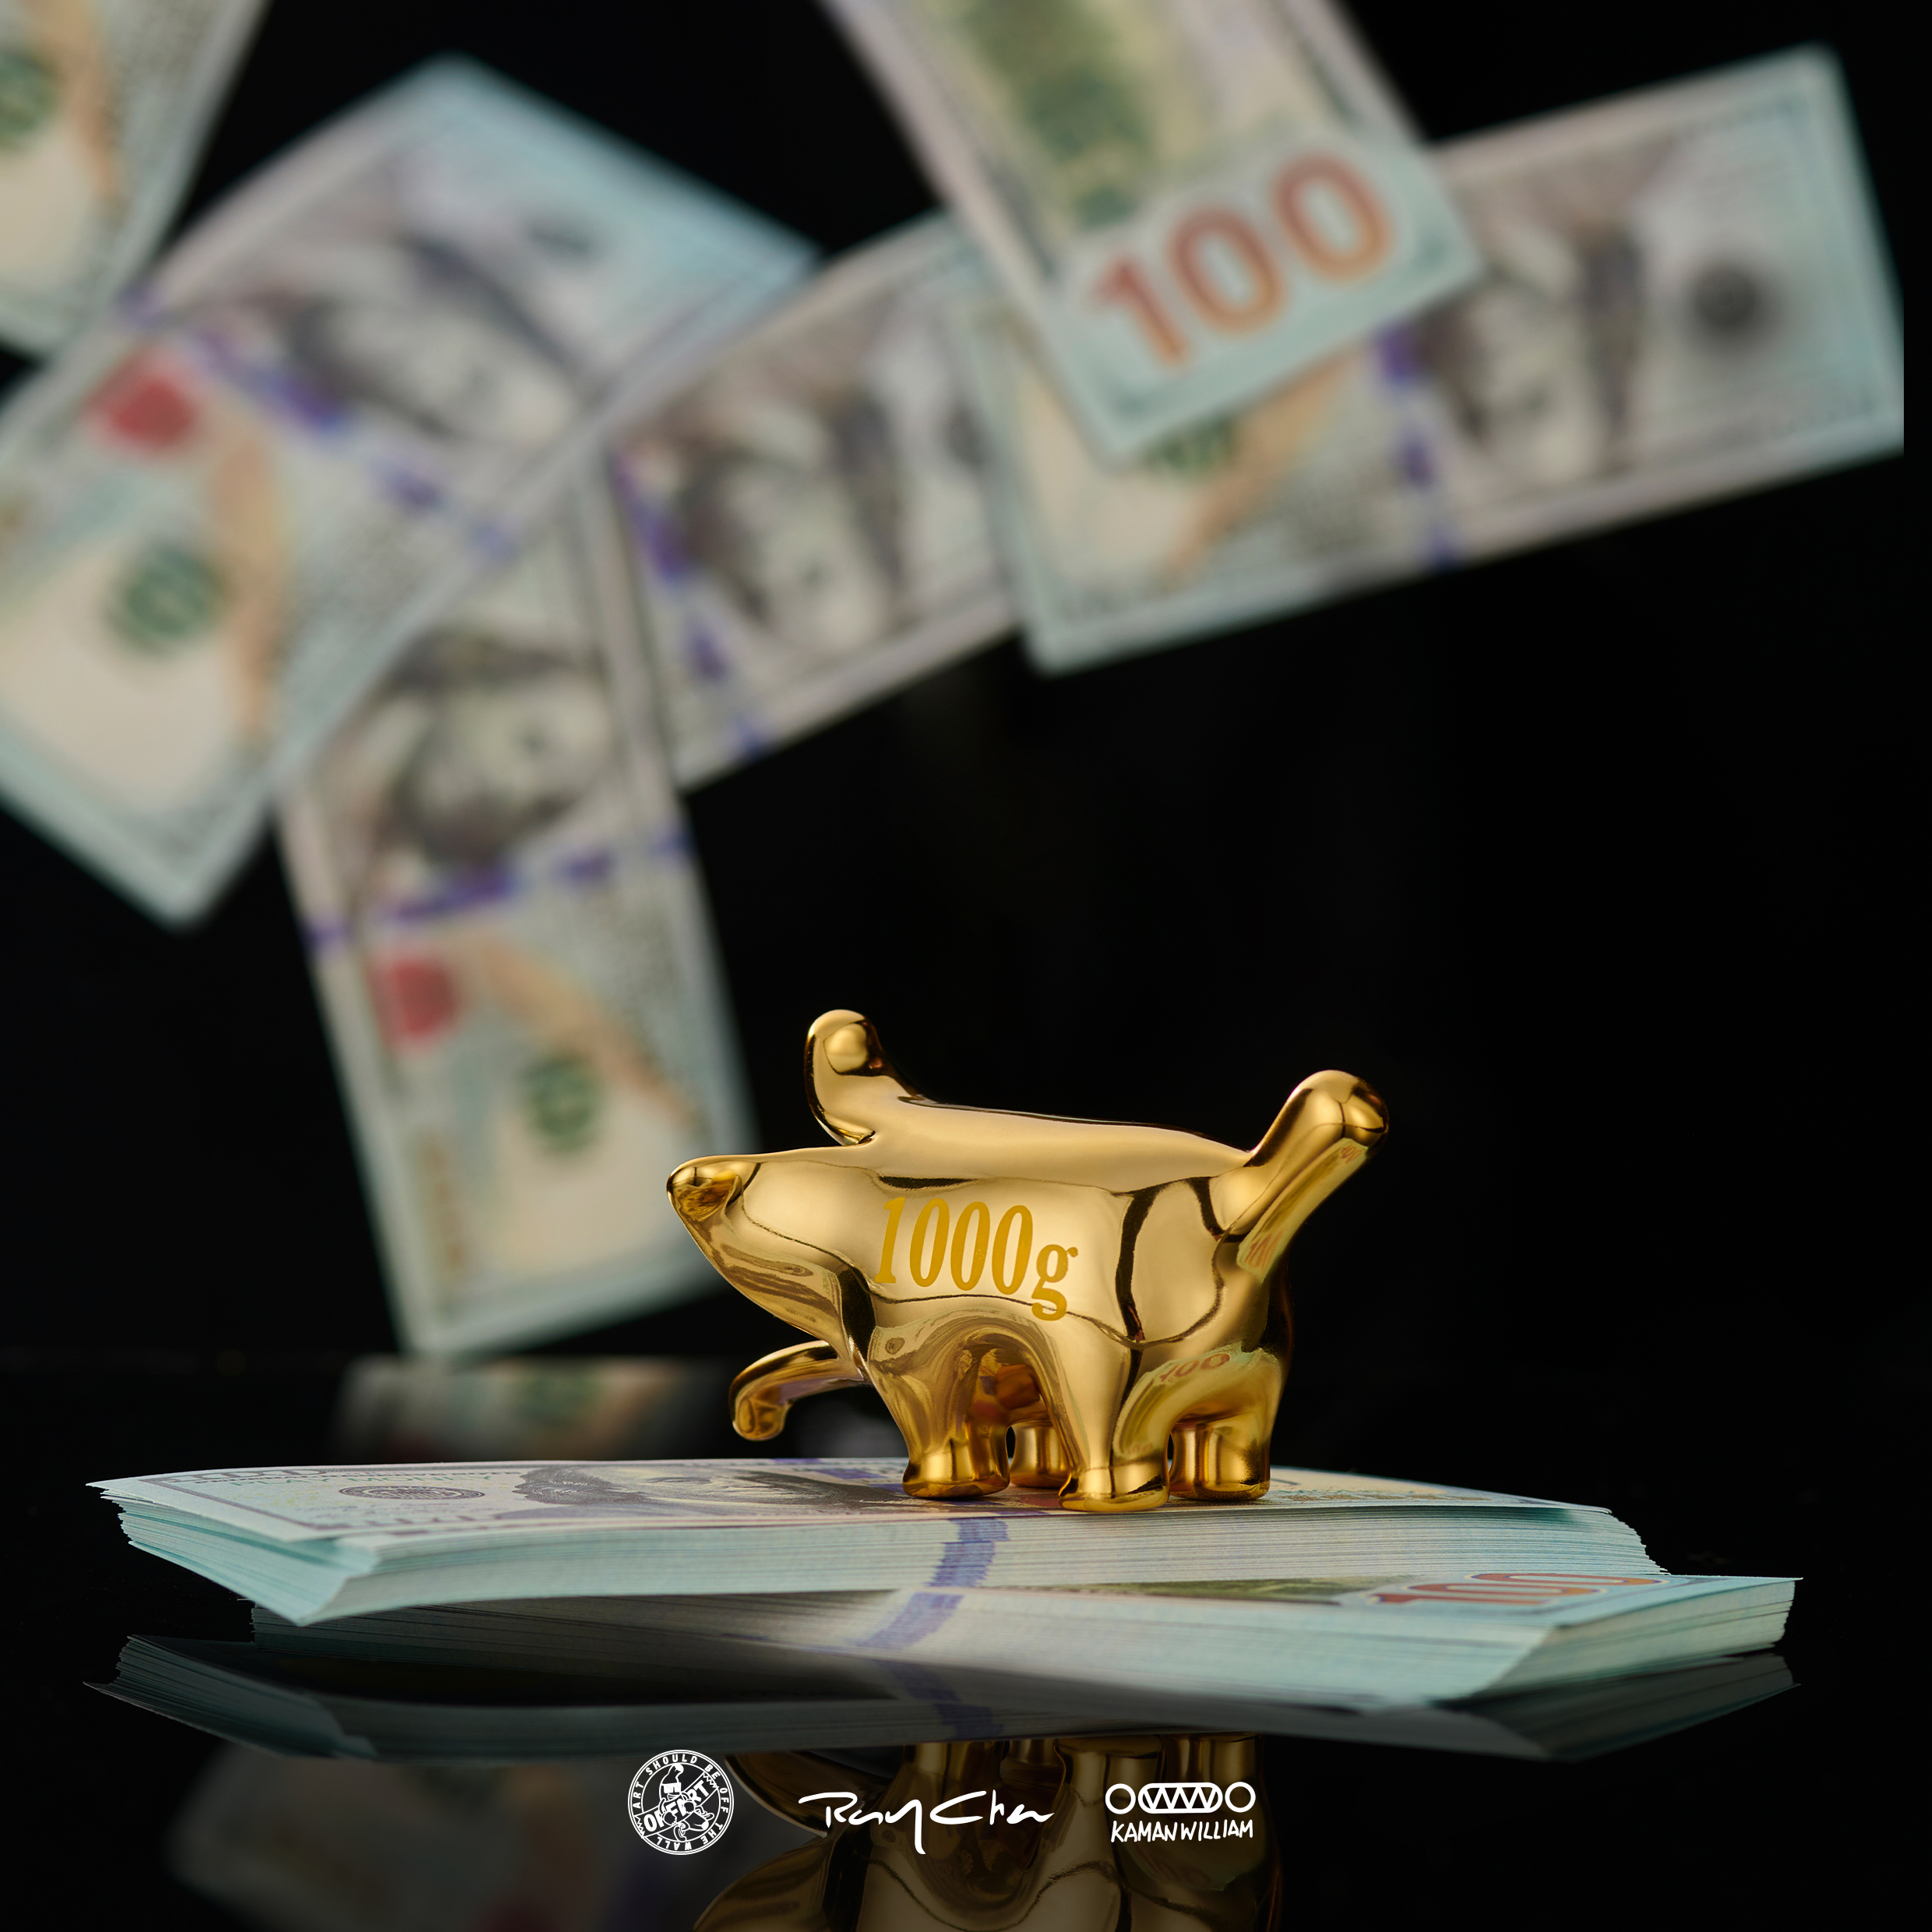 A blind box and art toy store presents OFFART X Kamanwillam Bananaer Dog Mini Gold Edition: a PVC piggy bank with detachable banana pulp feature. Gold pig figurine atop money.